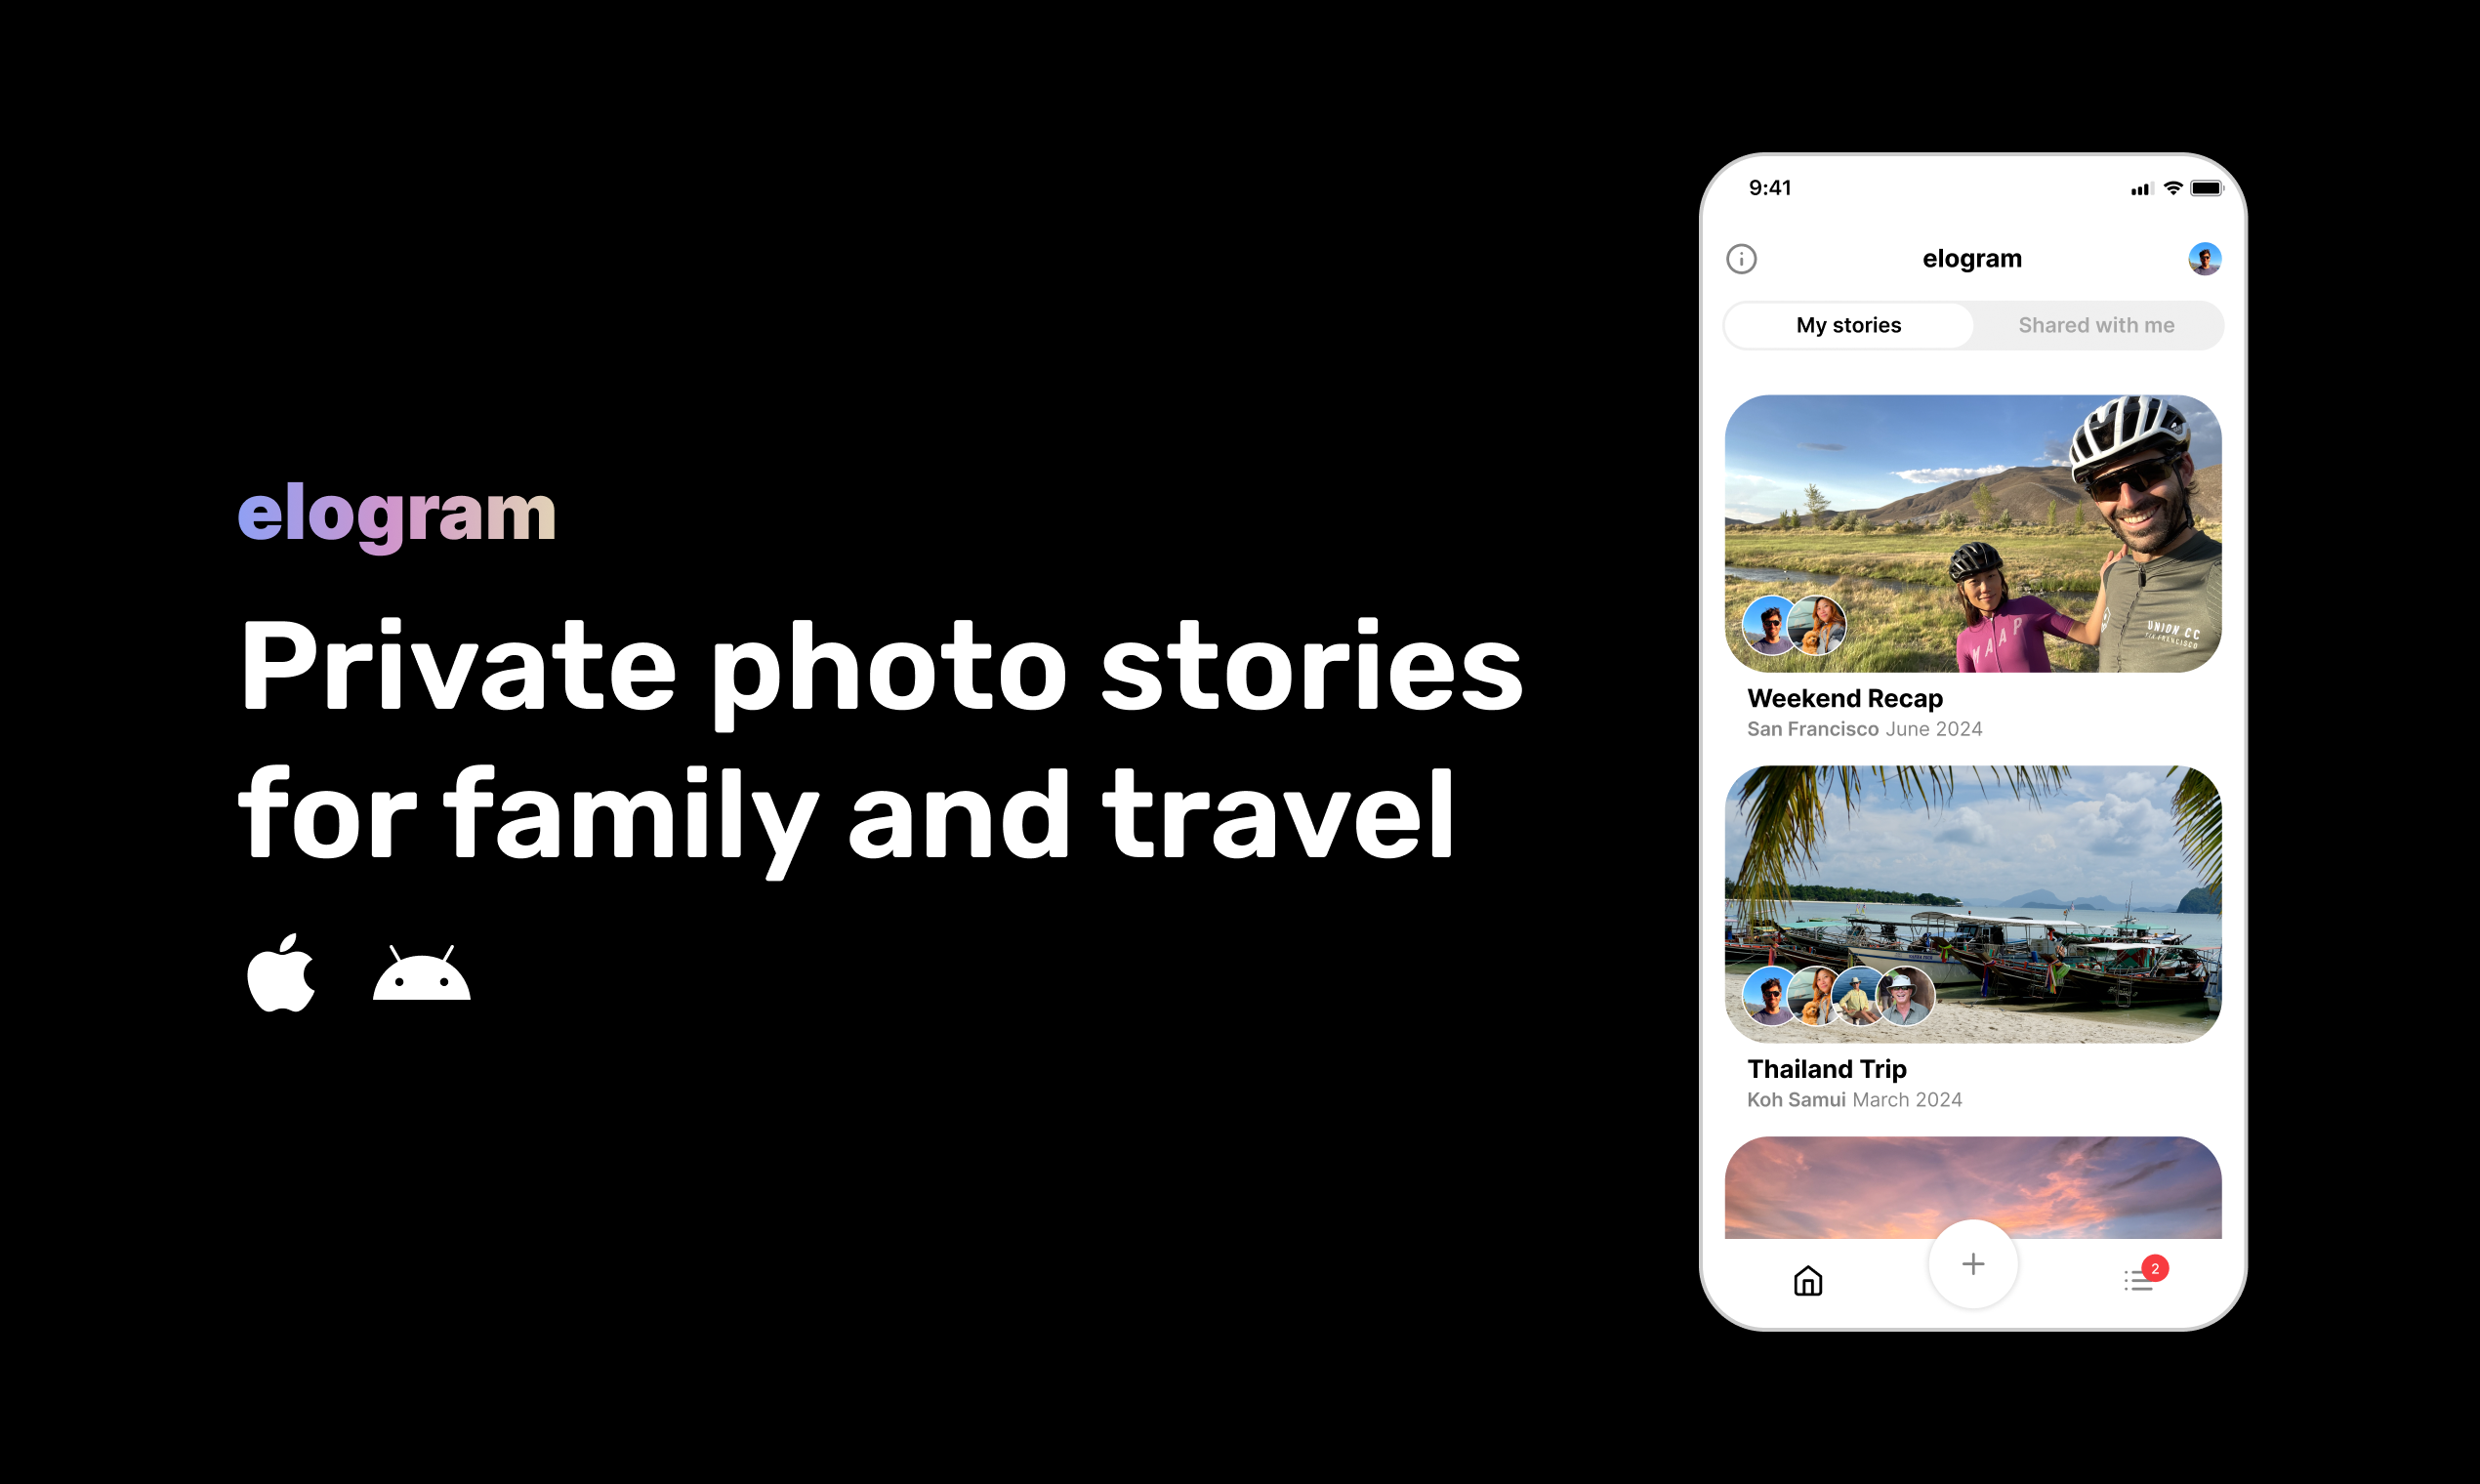 elogram - Private photo stories for family and travel